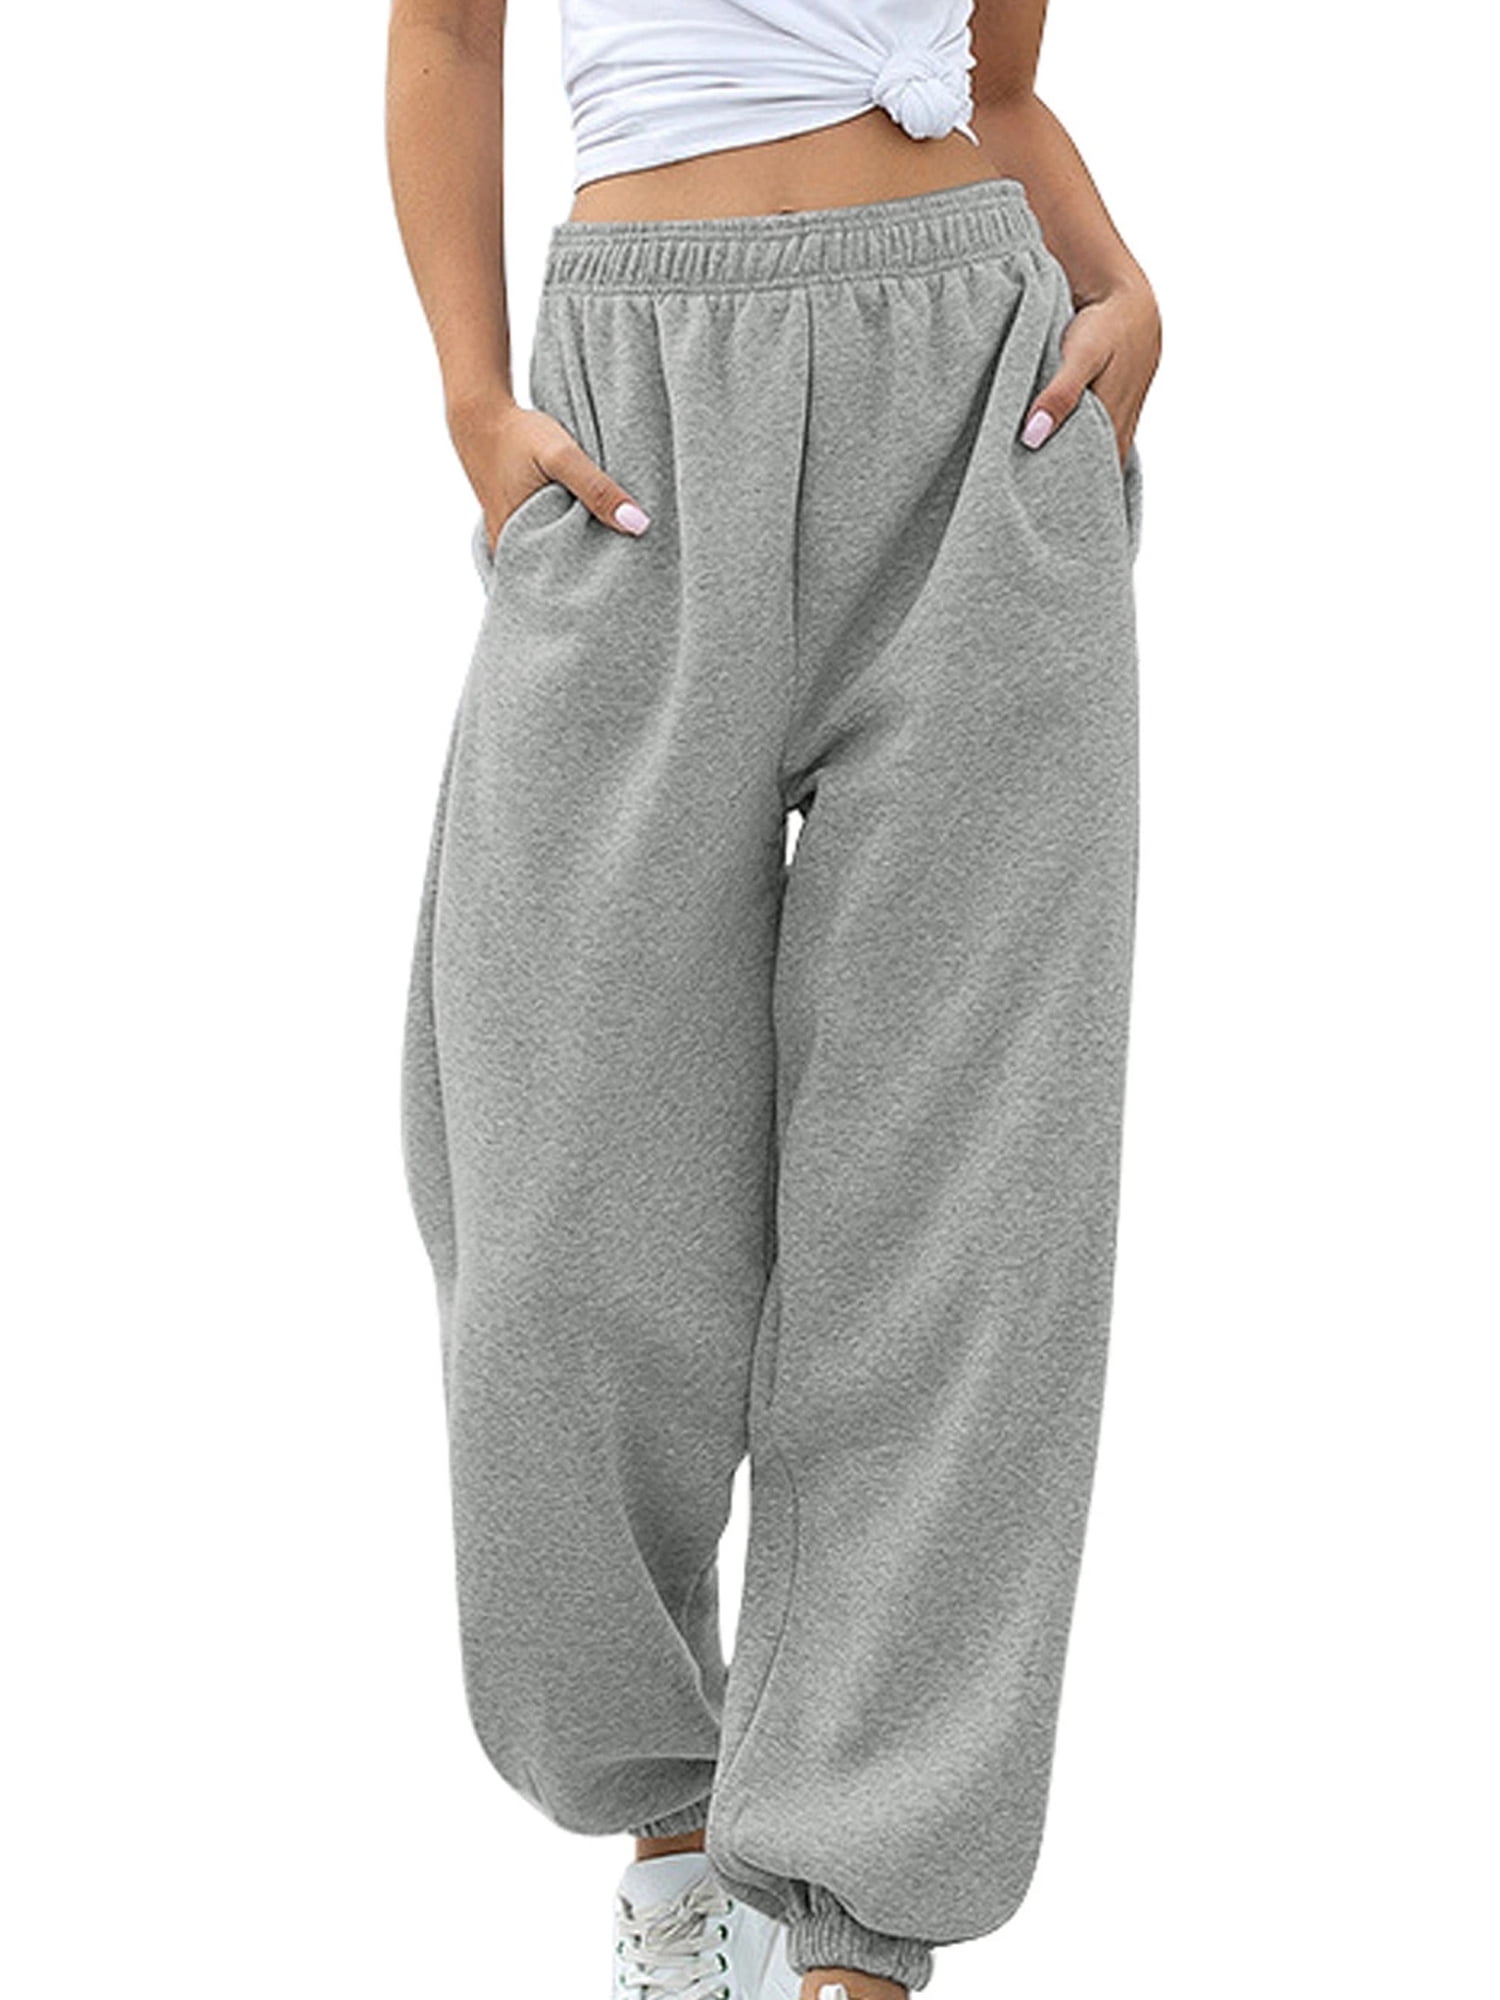 Popular Girl's Solid and Print Lightweight Jogger Pants with Pockets 